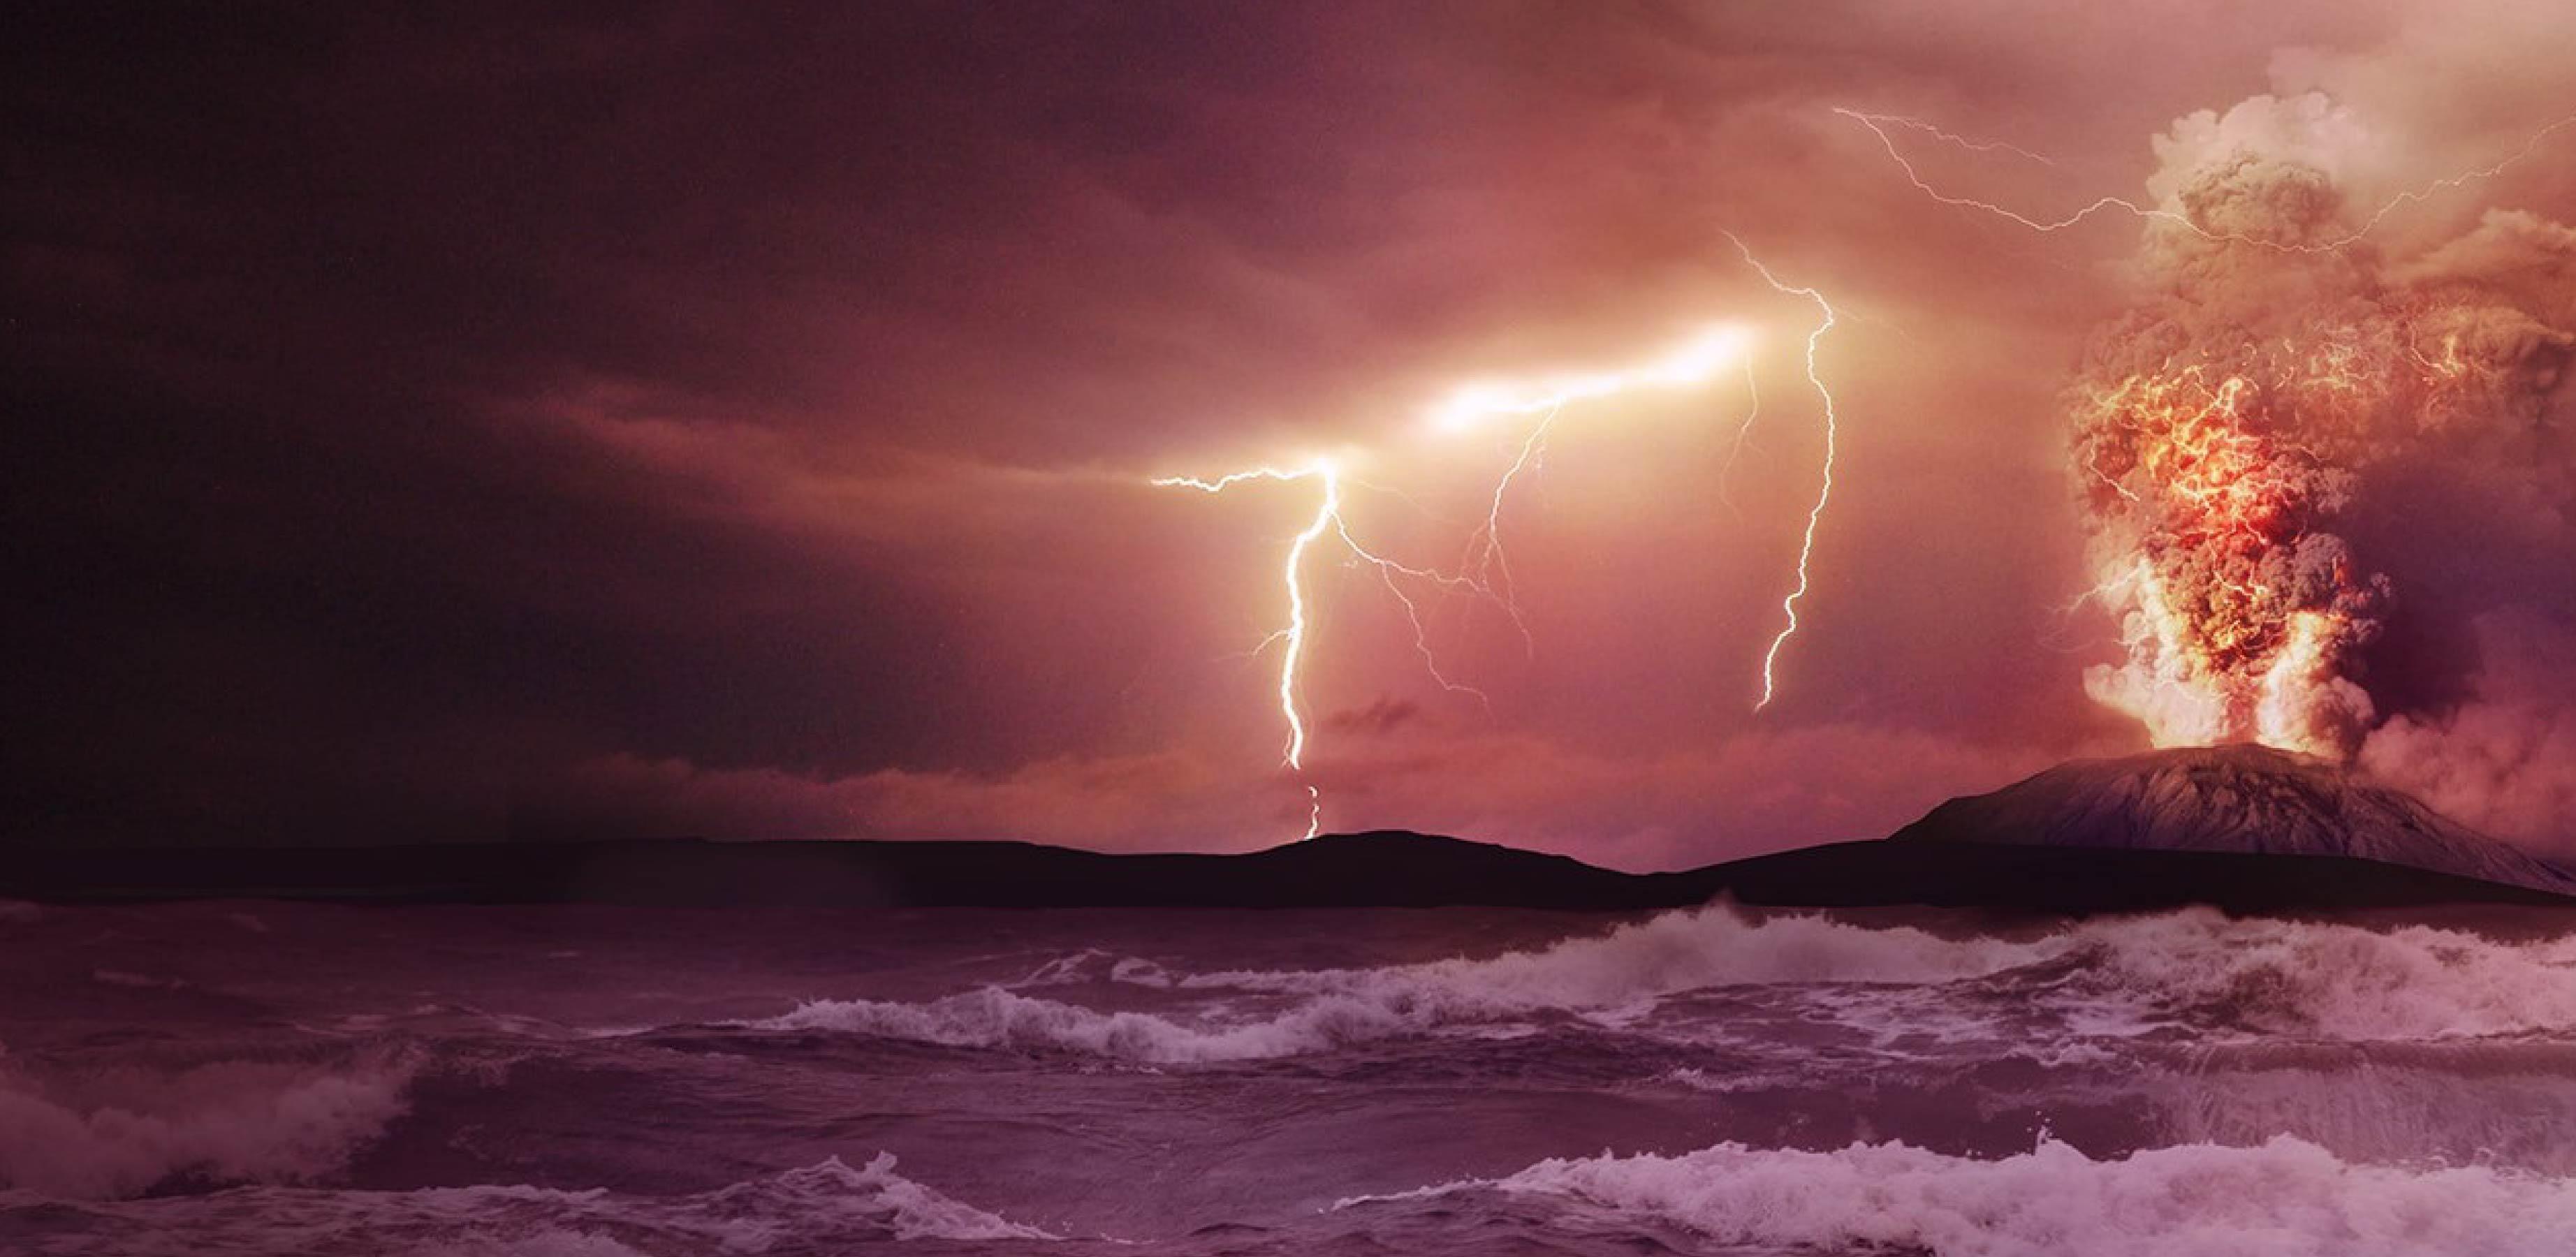 Photo of volcanic eruption with lightning and stormy sea in foreground